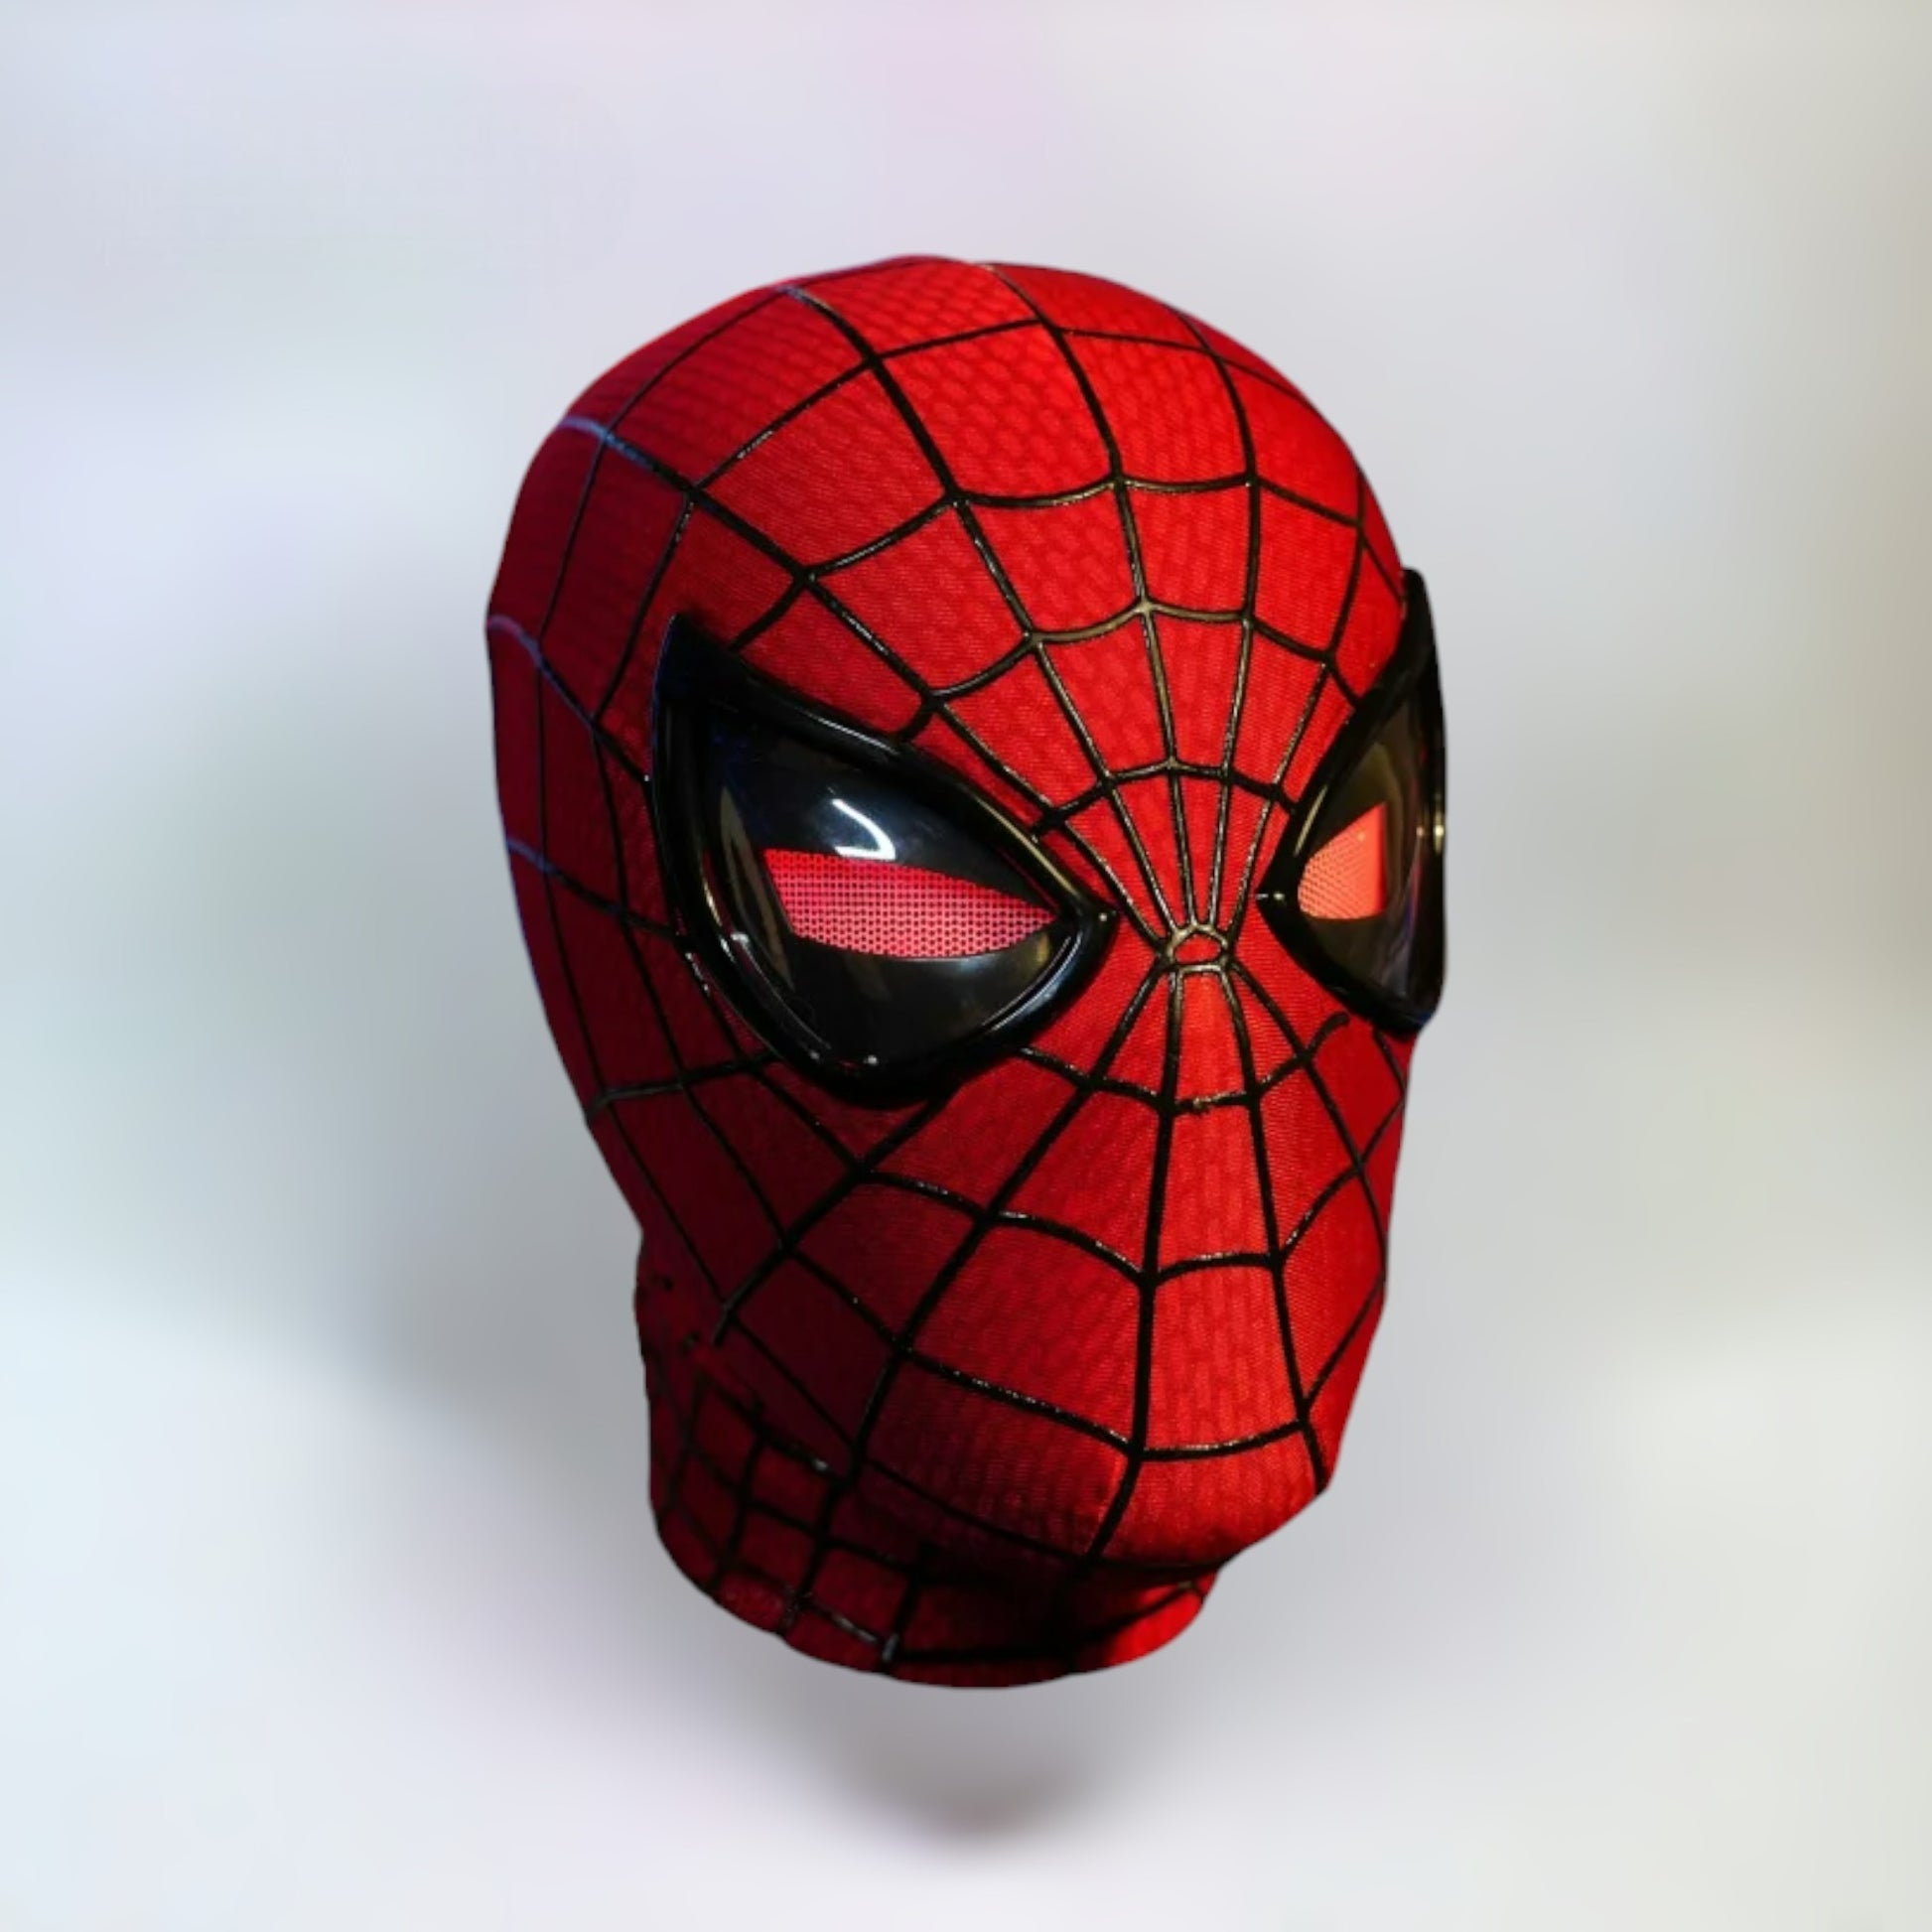 The Amazing Spiderman Mask with Blinking Movable Eyes Remote Controlled and LED Lights Red LED Eyes Closed Spiderman mask with plain white background